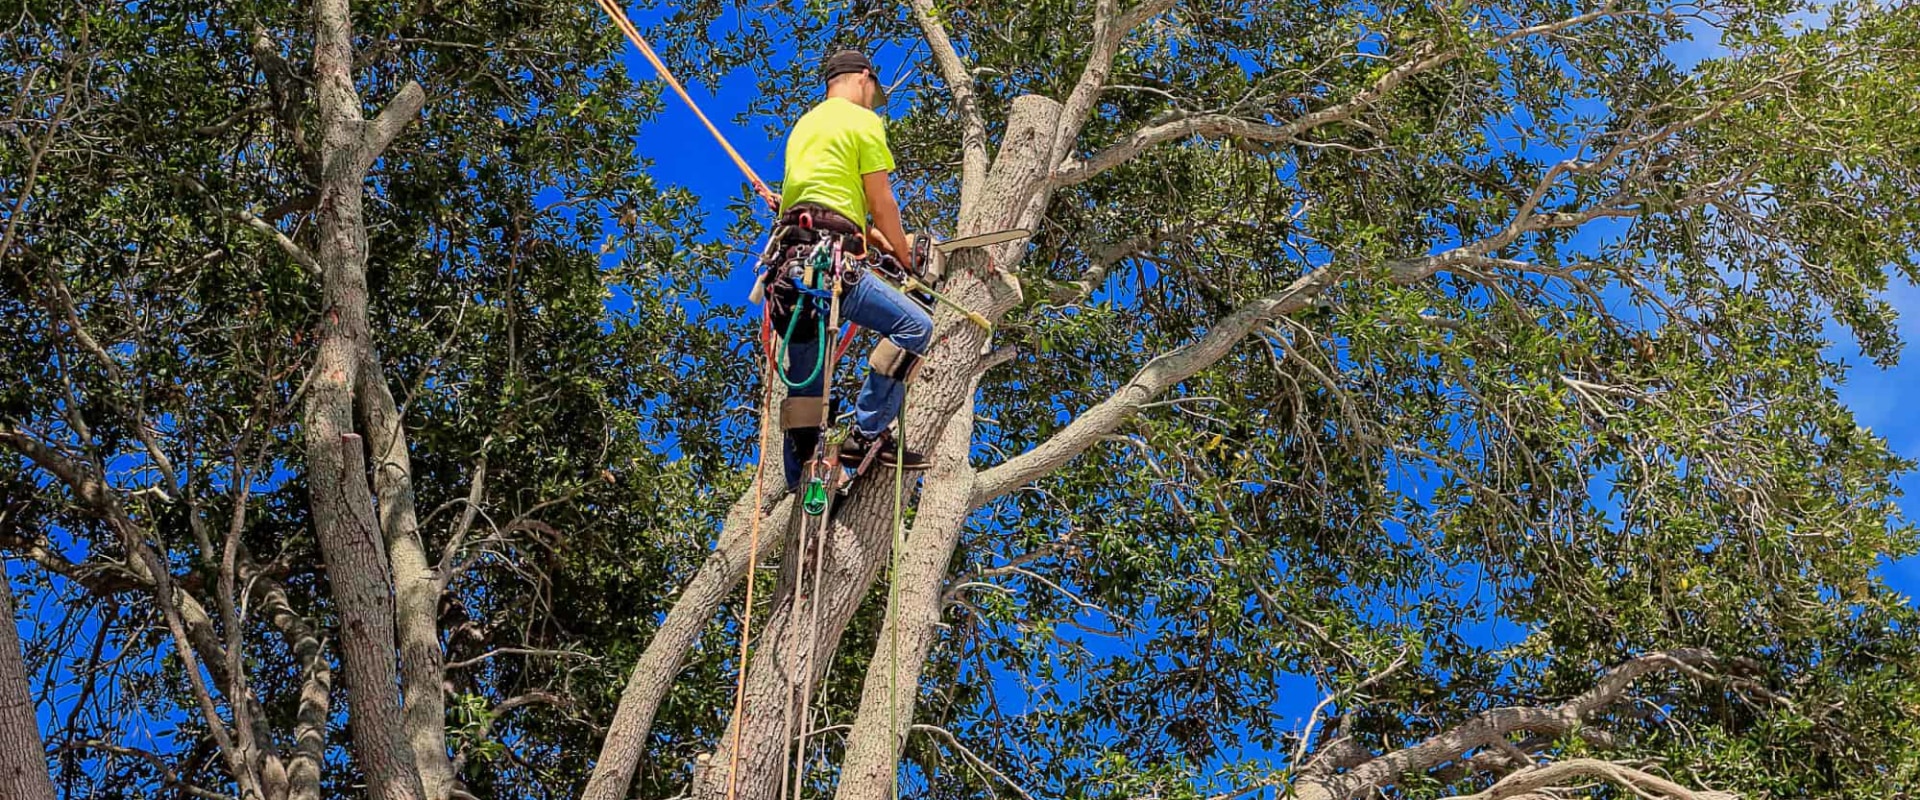 Do tree removal companies need a license?